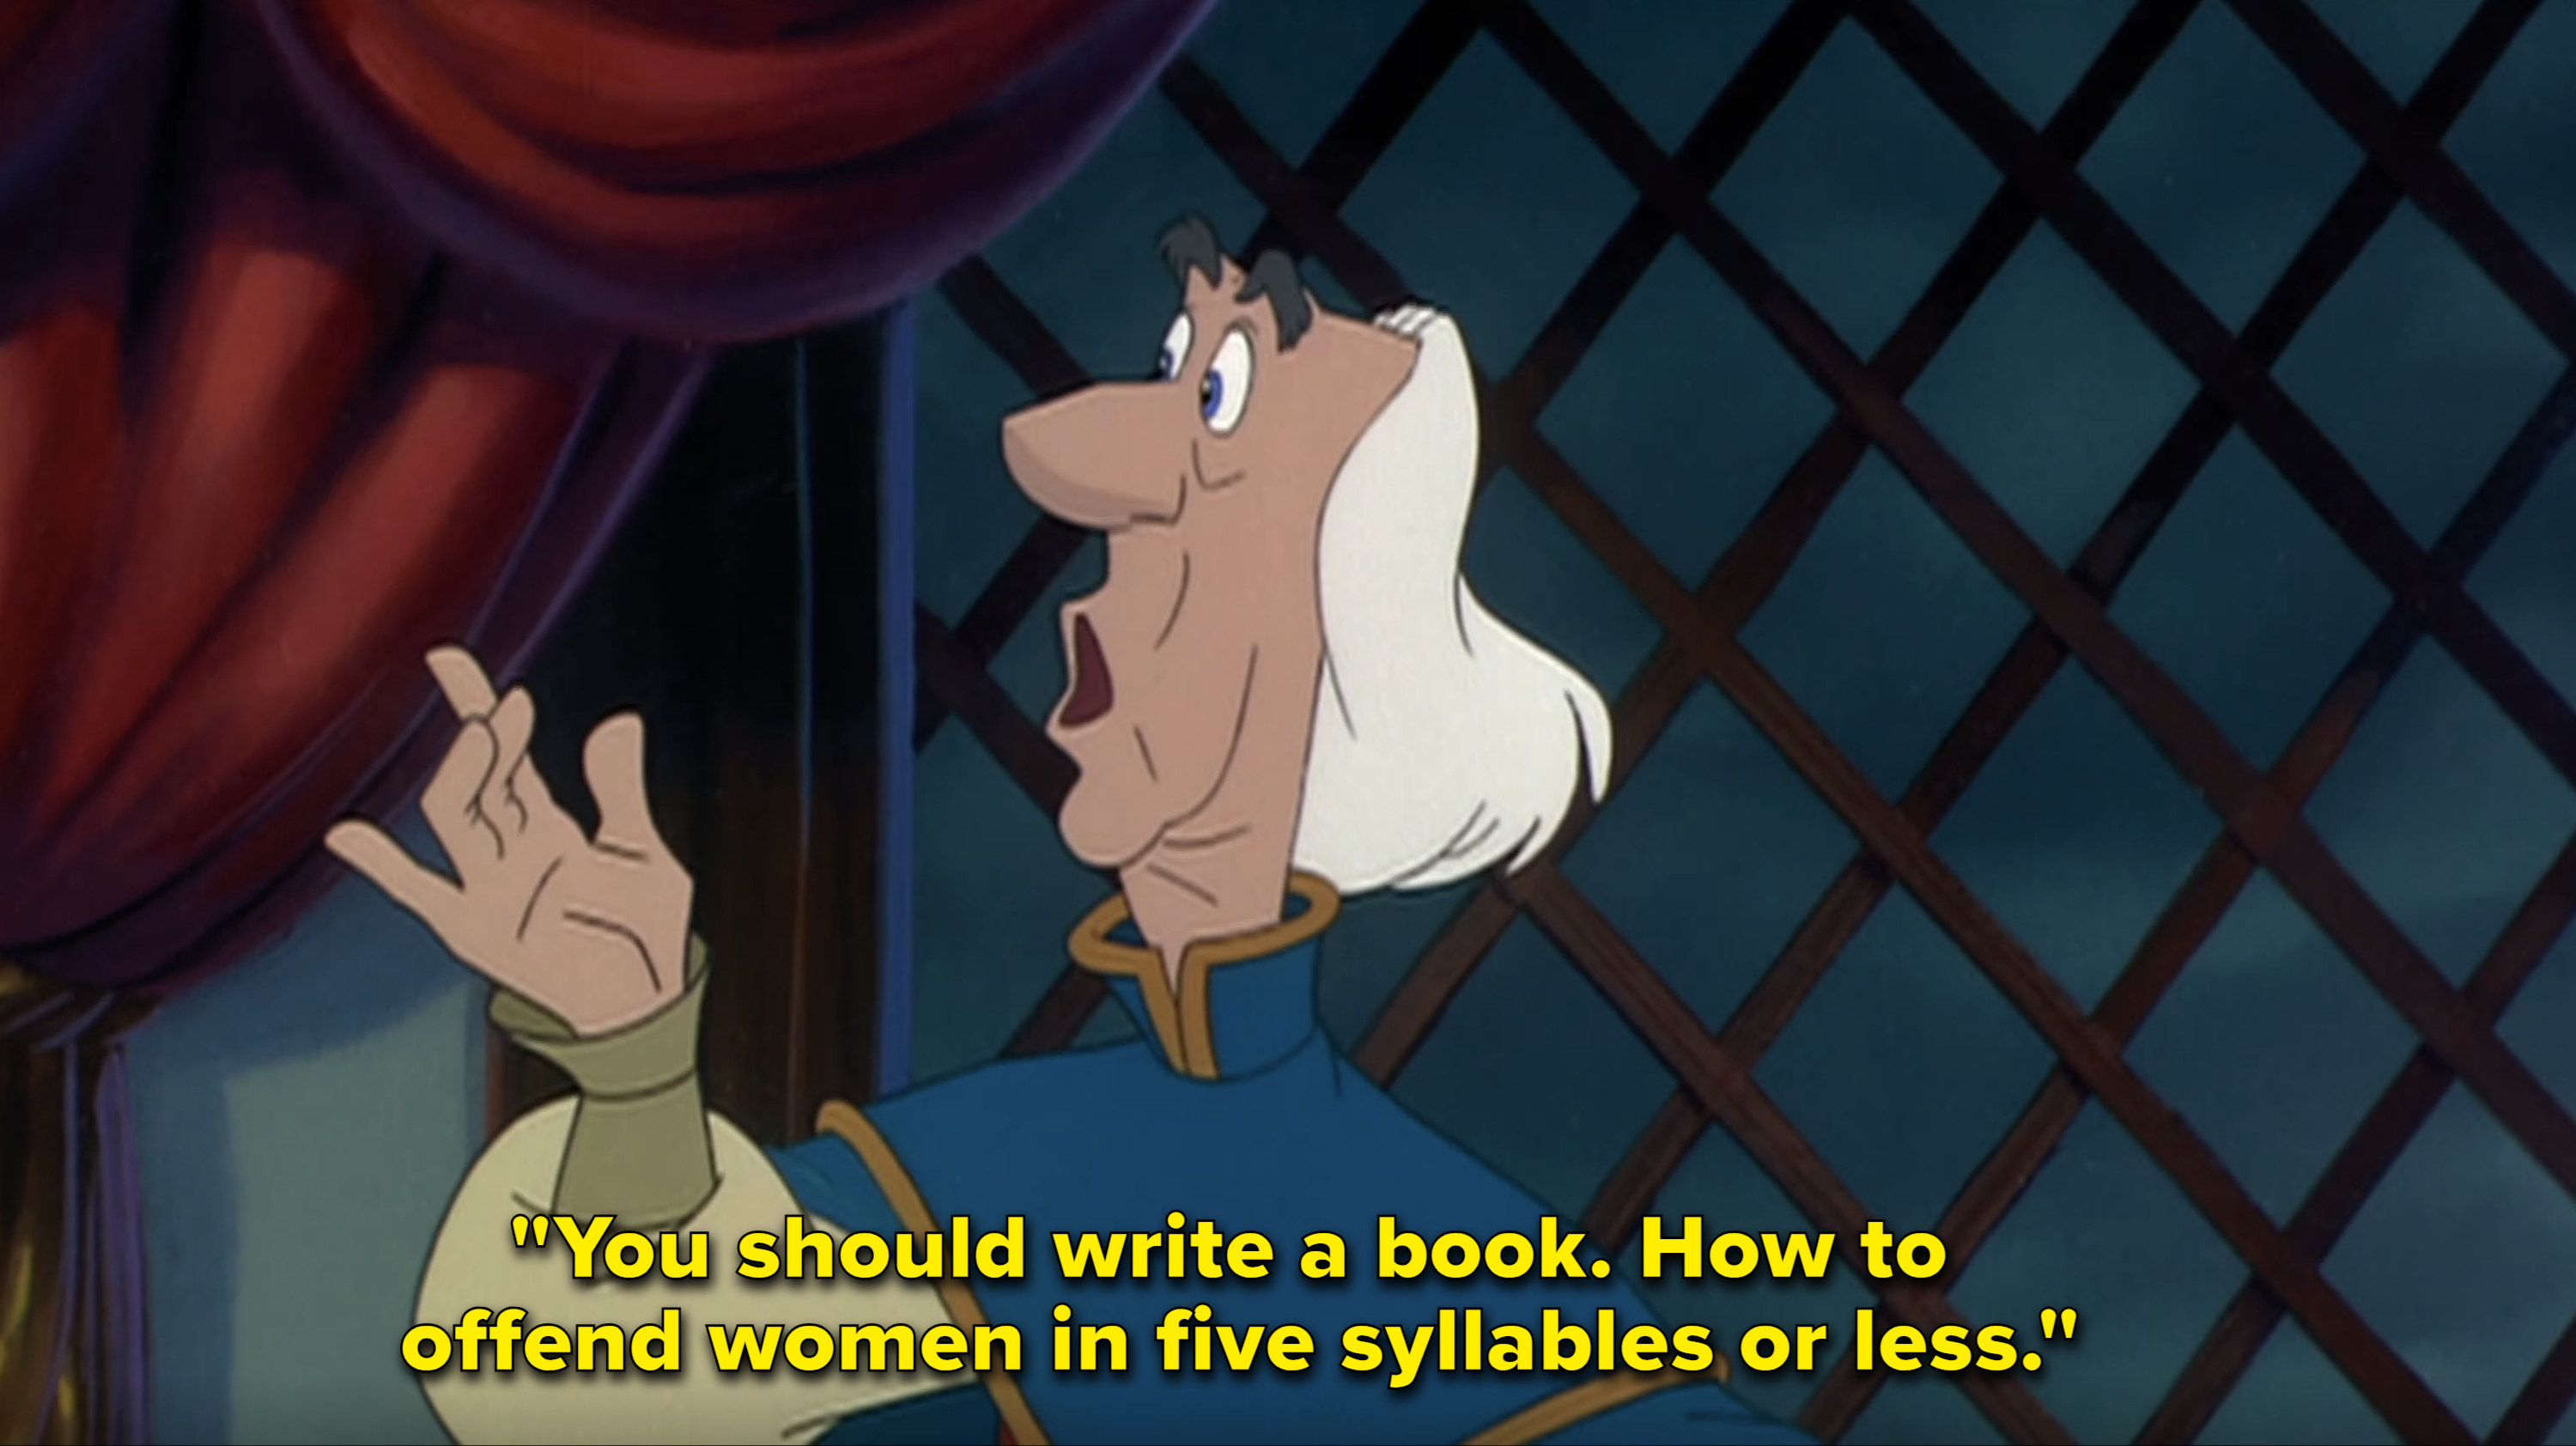 Rogers saying &quot;You should write a book. How to offend women in five syllables or less.&quot;